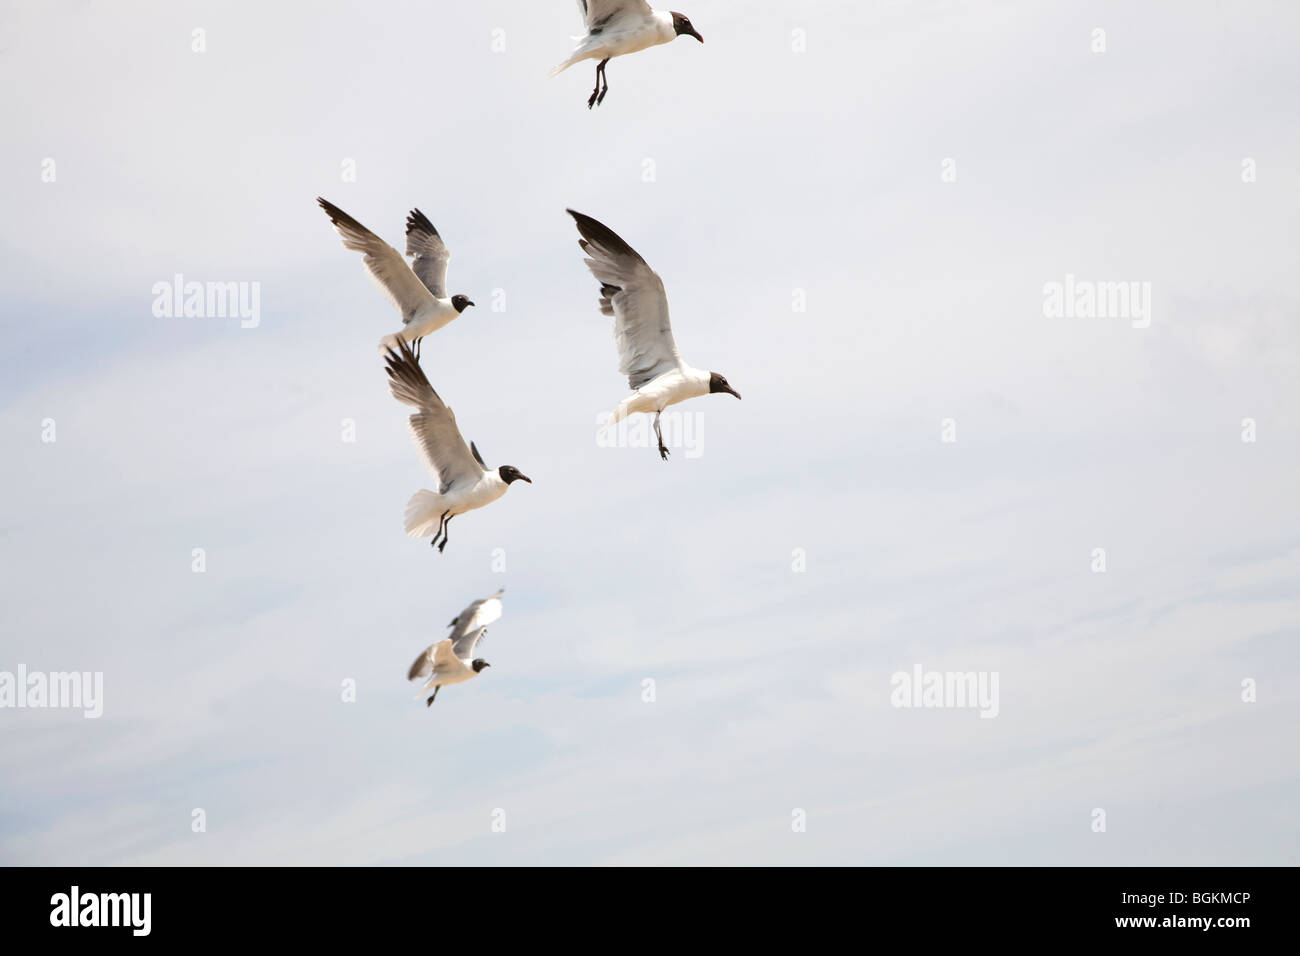 Seagulls flying against cloudy sky Stock Photo